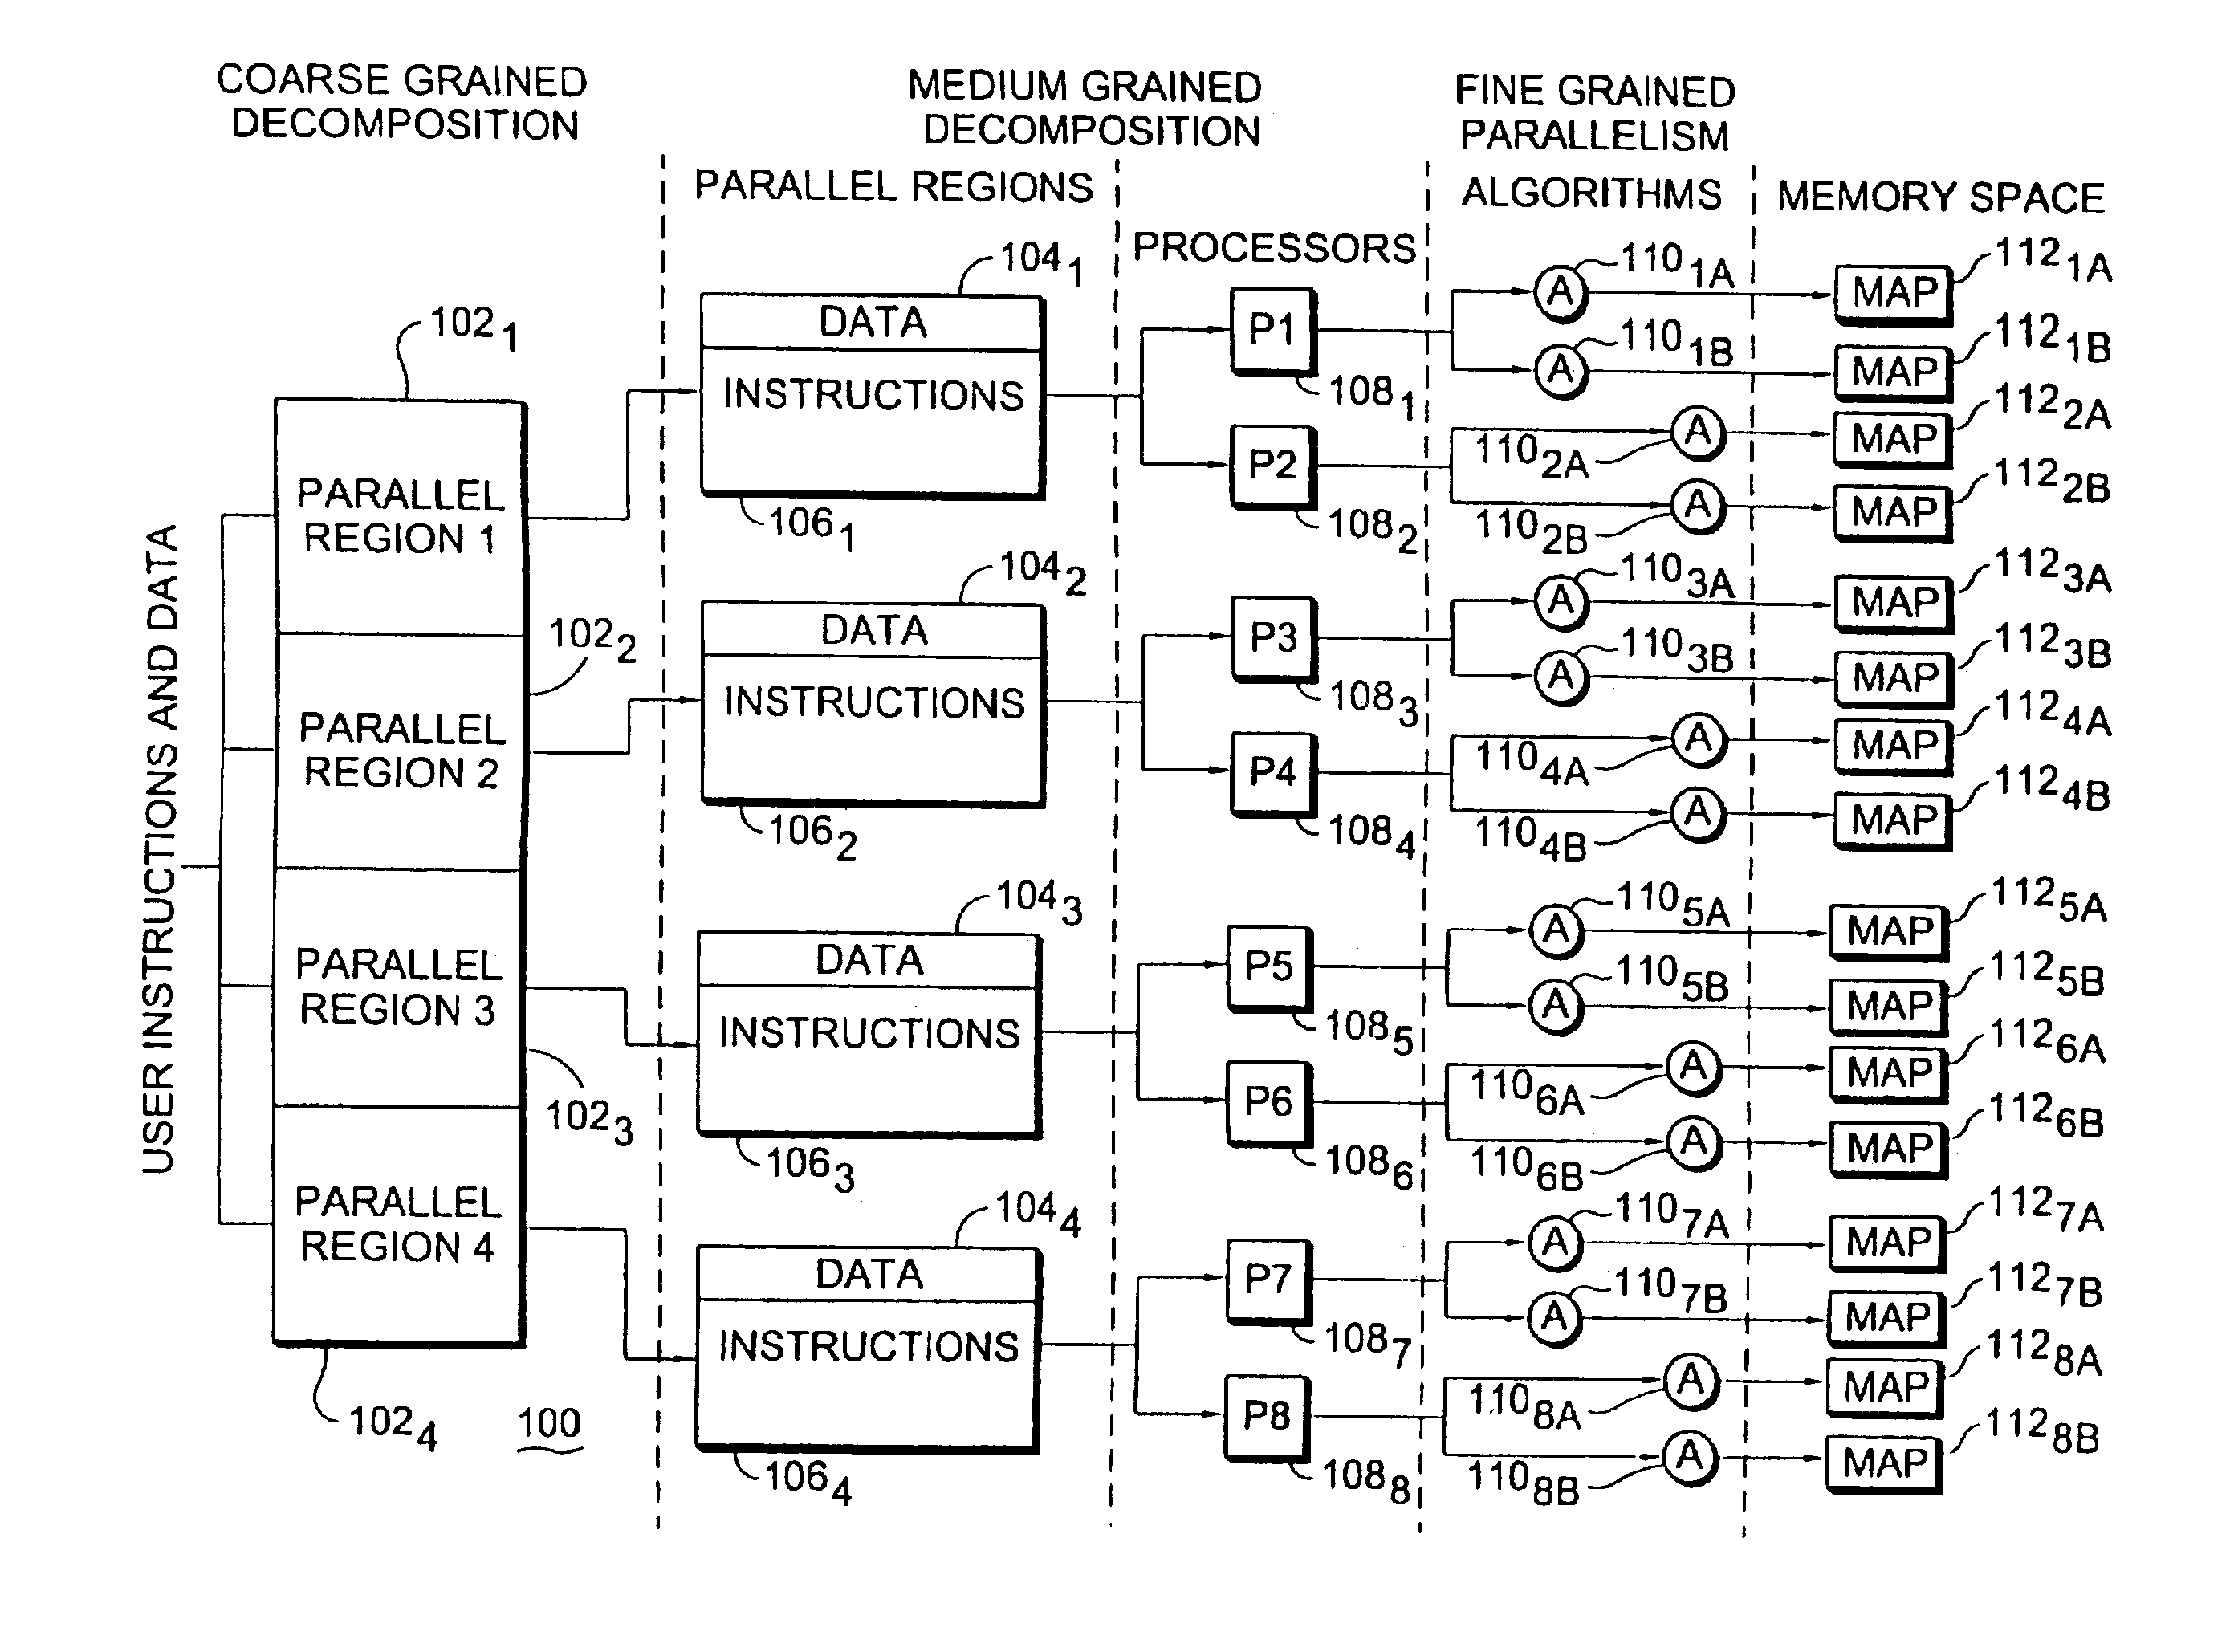 Multiprocessor computer architecture incorporating a plurality of memory algorithm processors in the memory subsystem